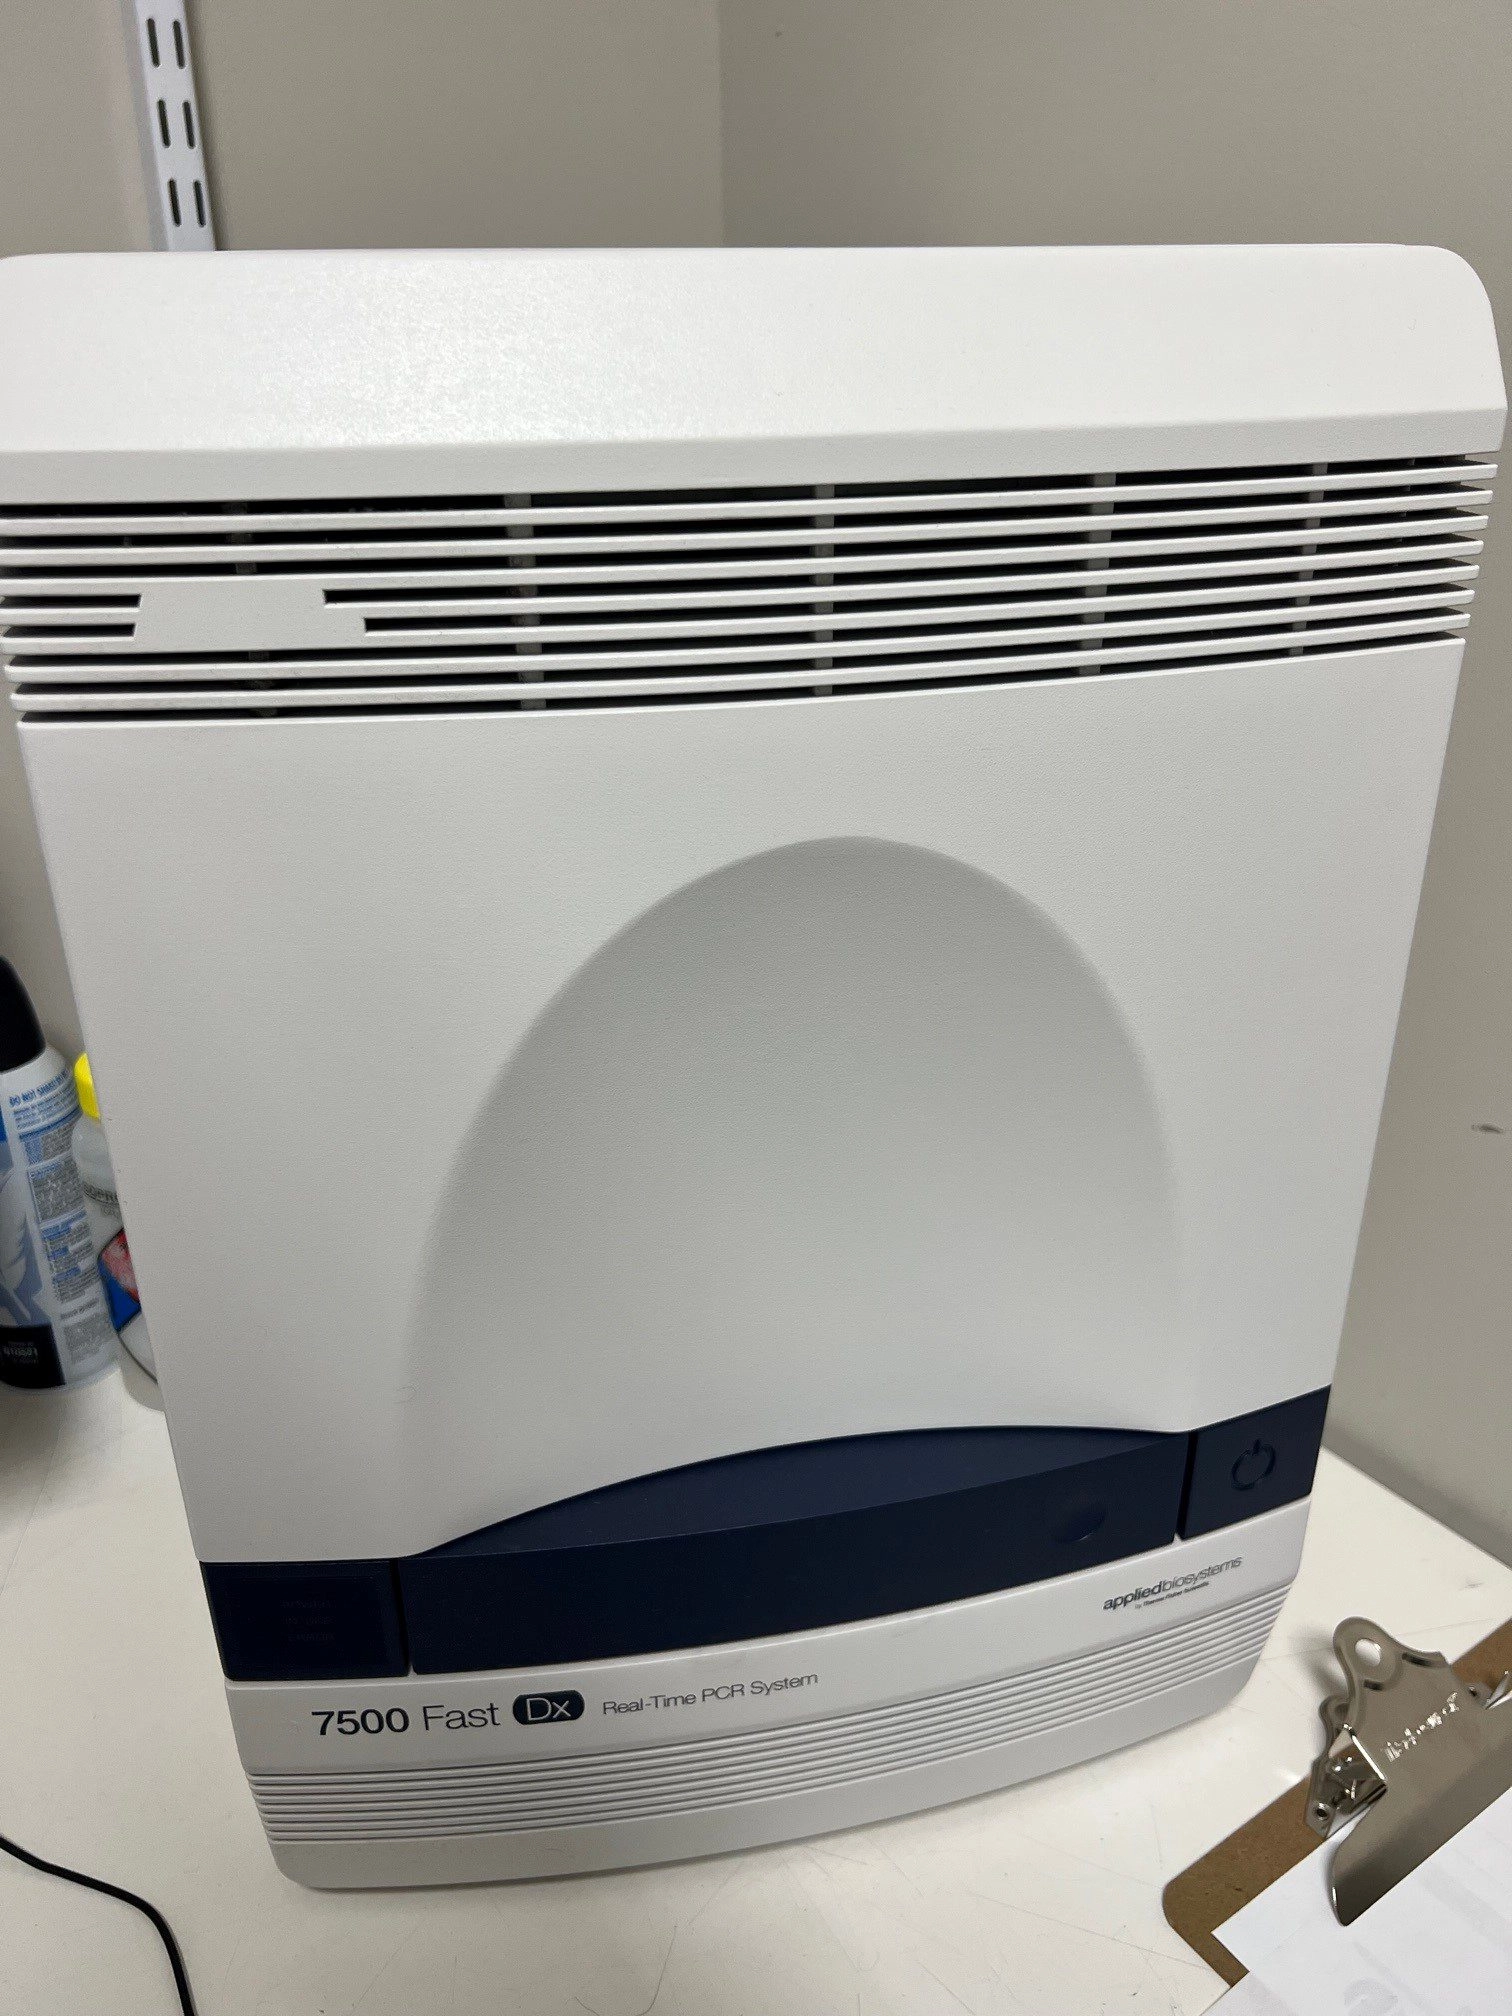 Applied Biosystems 7500 Fast Dx Real-Time PCR